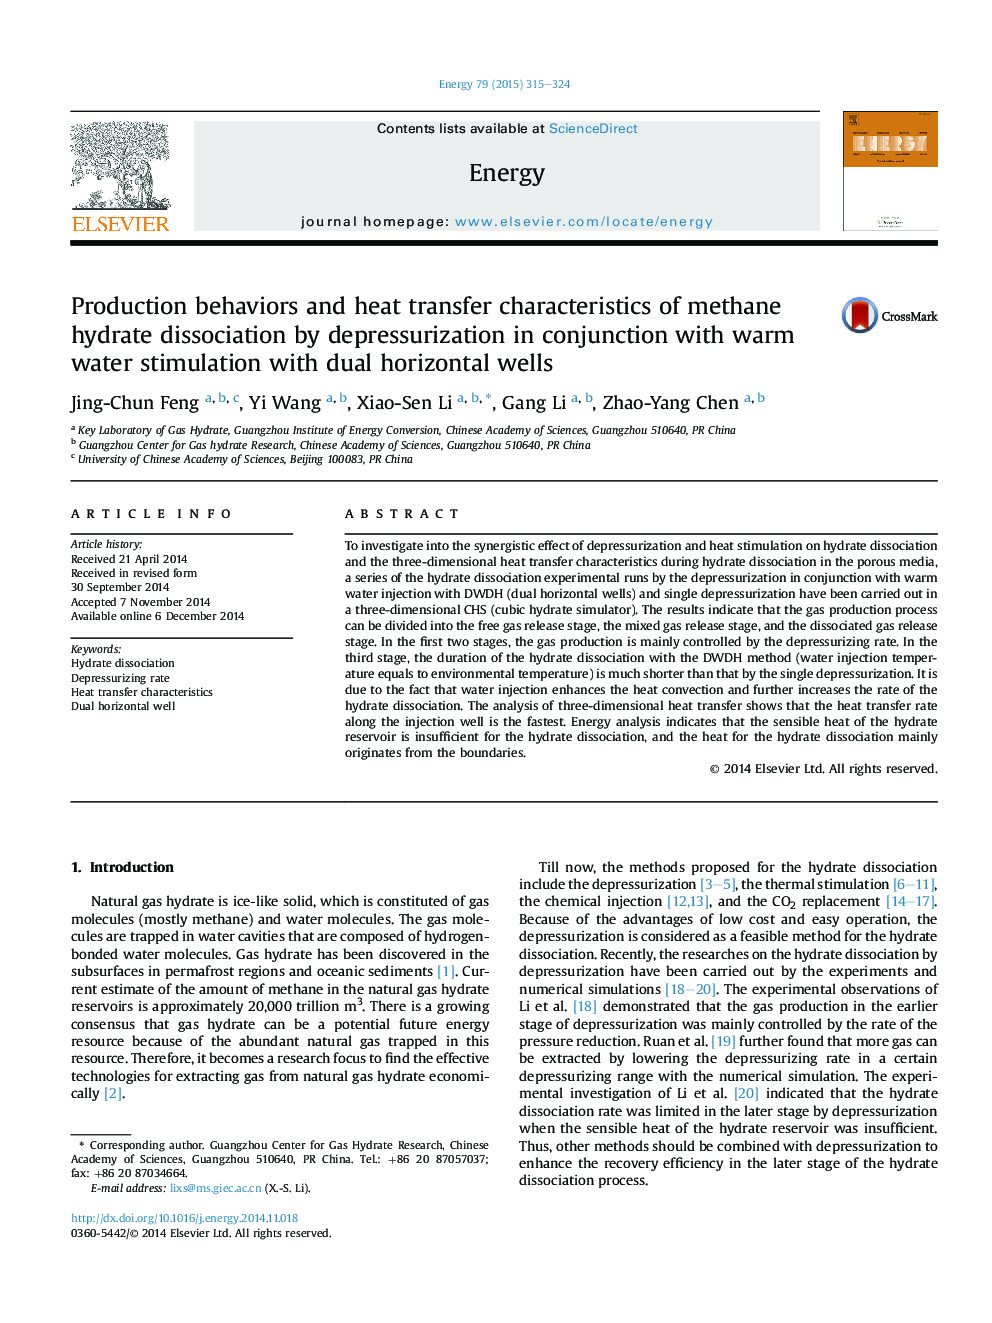 Production behaviors and heat transfer characteristics of methane hydrate dissociation by depressurization in conjunction with warm water stimulation with dual horizontal wells